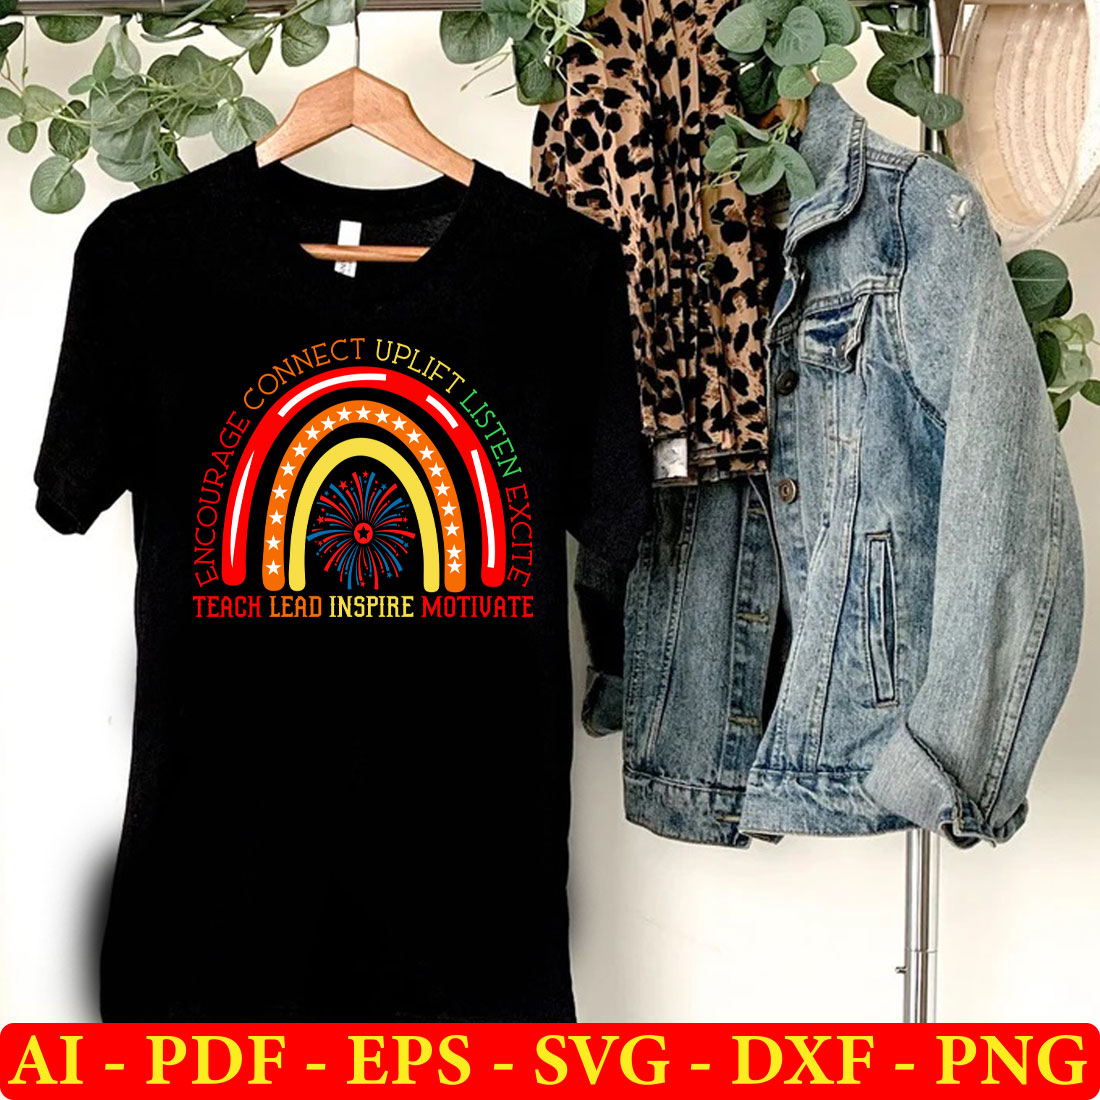 Black shirt with a rainbow on it next to a pair of denim jackets.